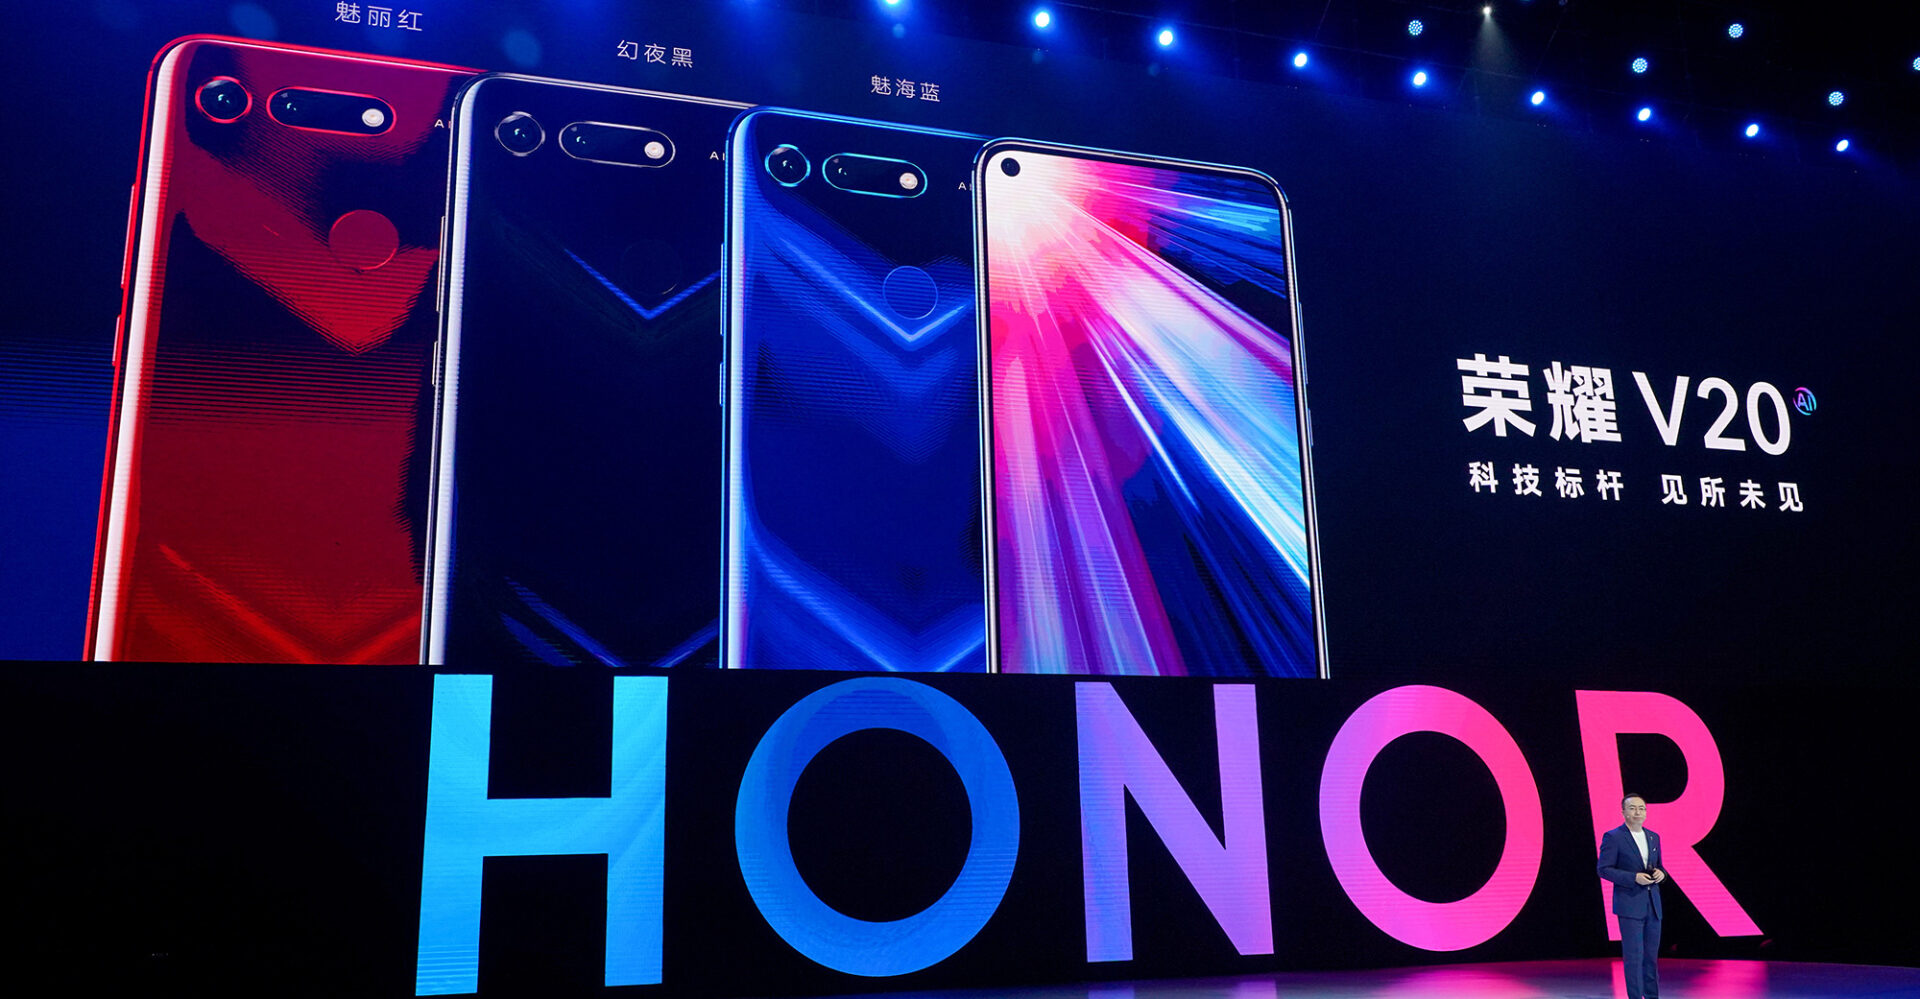 Honor V20 with 48MP camera & a punch-hole notch launched in China